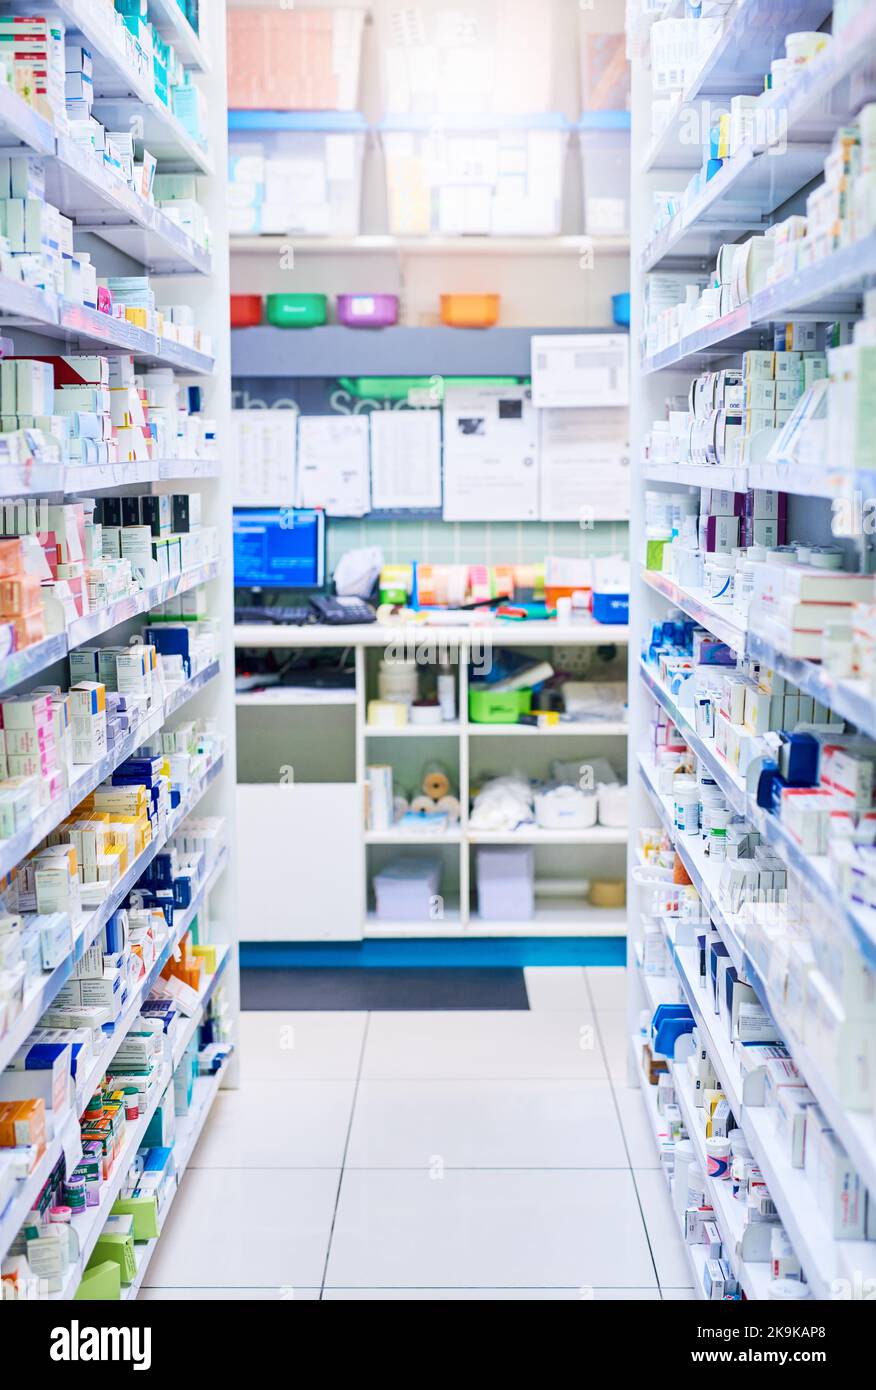 We have just the medicine for you. shelves stocked with various medicinal products in a pharmacy. Stock Photo